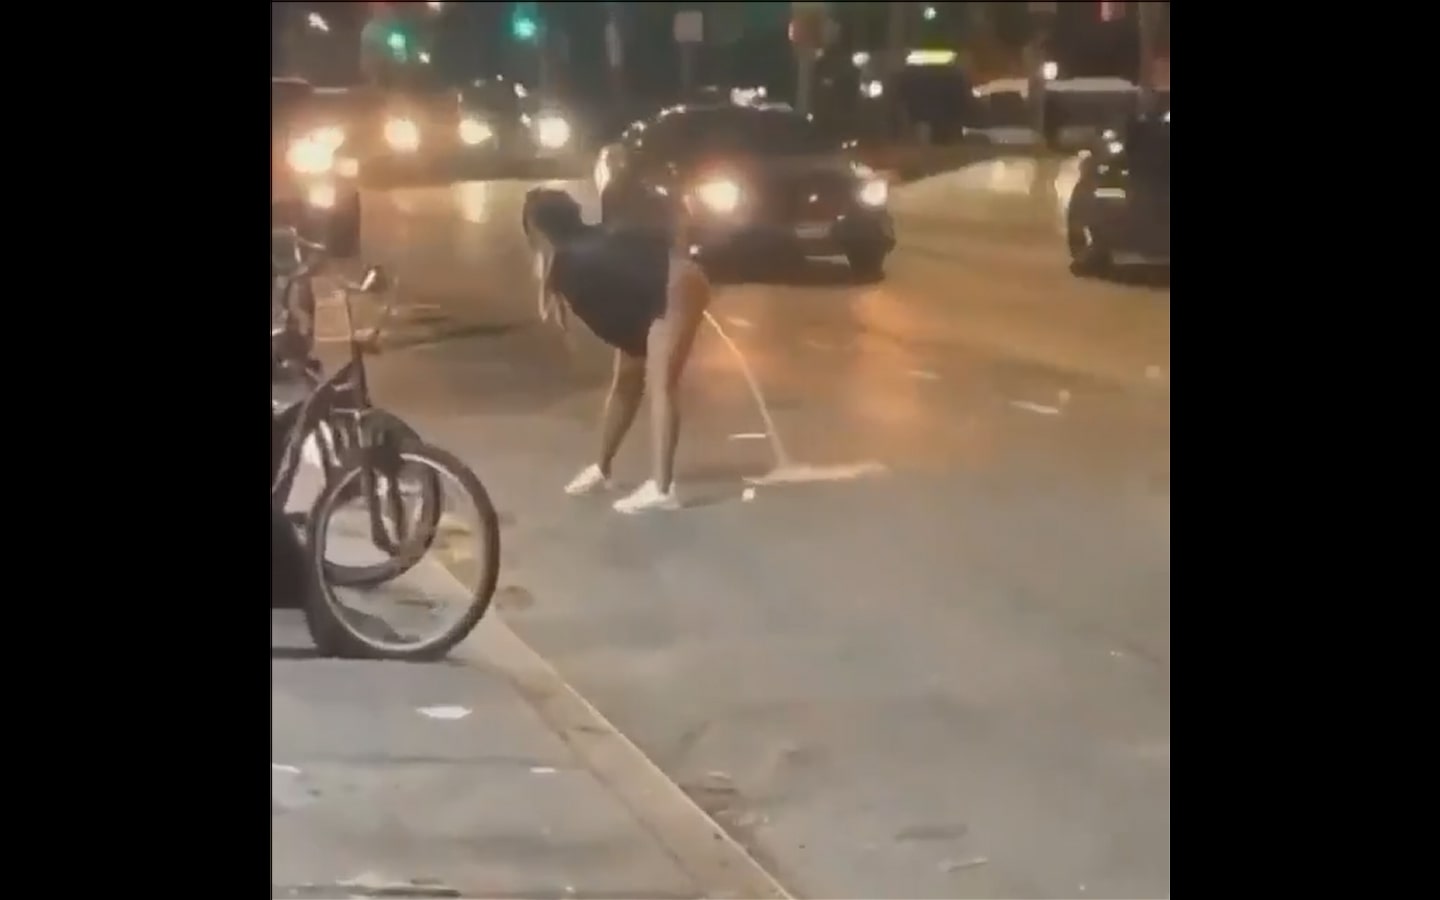 Ebony Pissing in the Middle of the Street